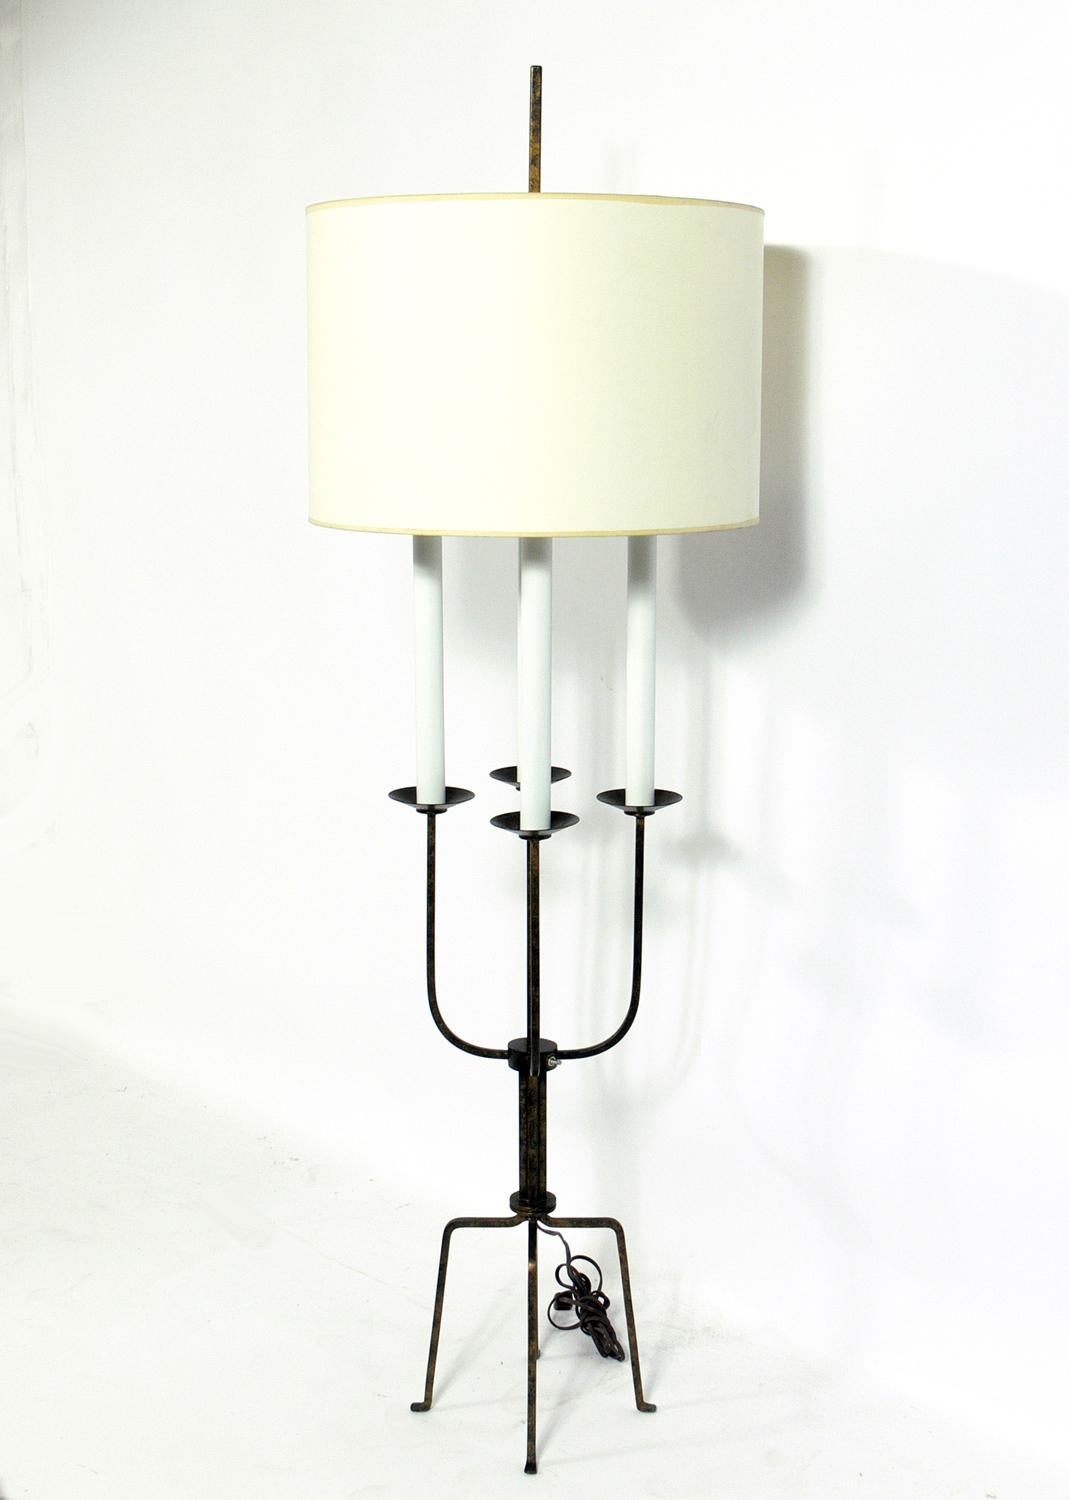 Elegant floor lamp, designed by Tommi Parzinger, American, circa 1950s. It retains it's original gold patinated finish with warm original patina. It has been rewired and is ready to use.